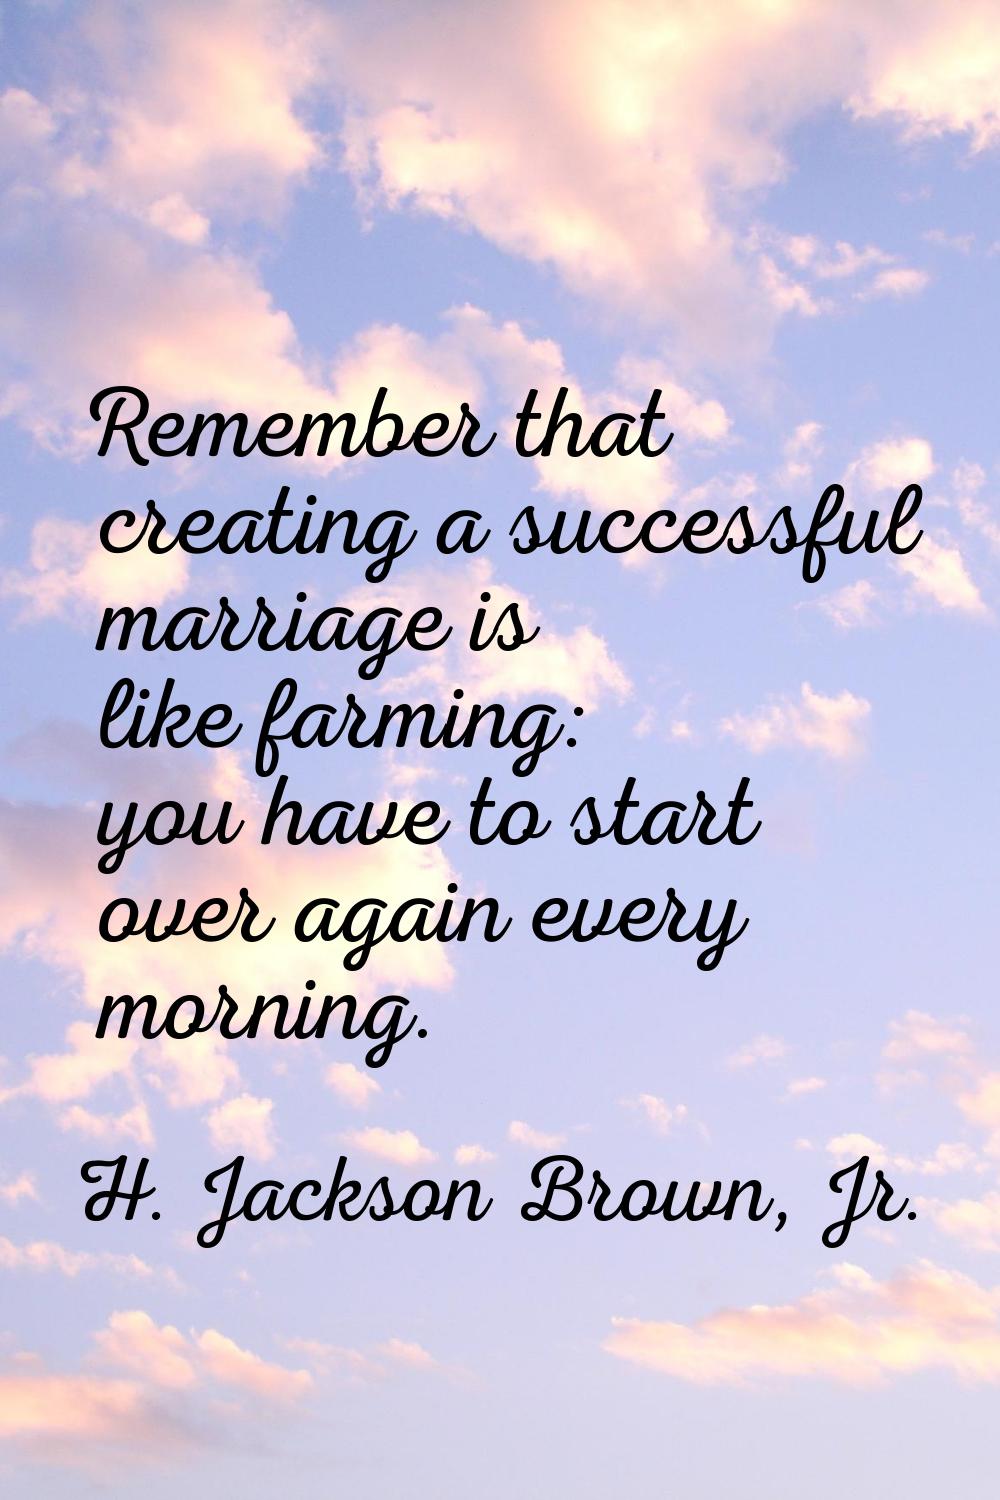 Remember that creating a successful marriage is like farming: you have to start over again every mo